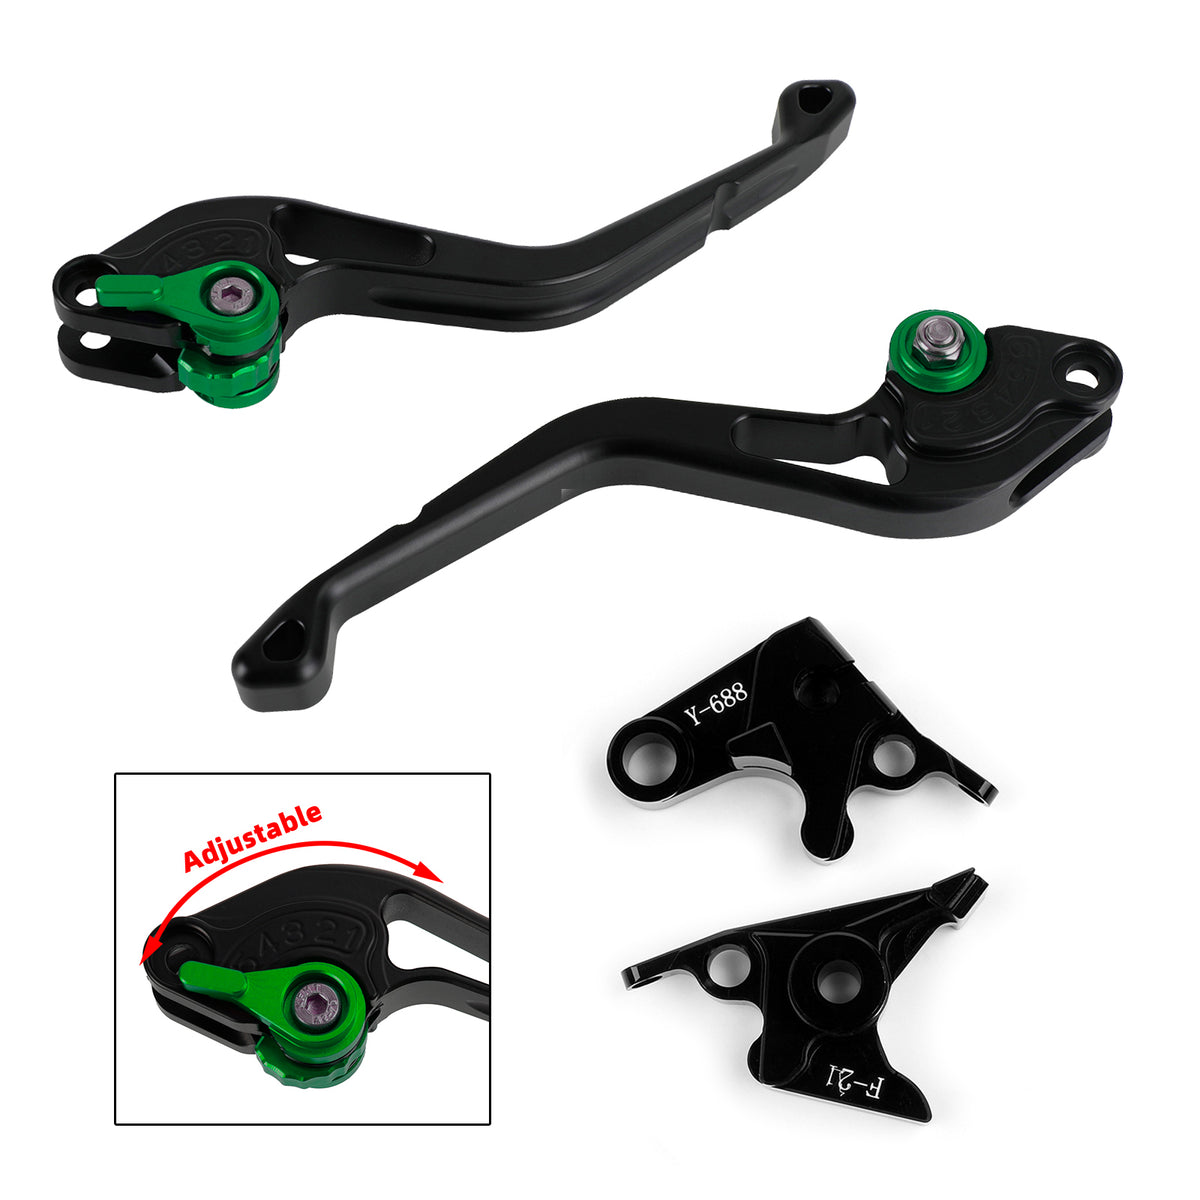 NEW Short Clutch Brake Lever fit for Yamaha YZF R1 1999-2001